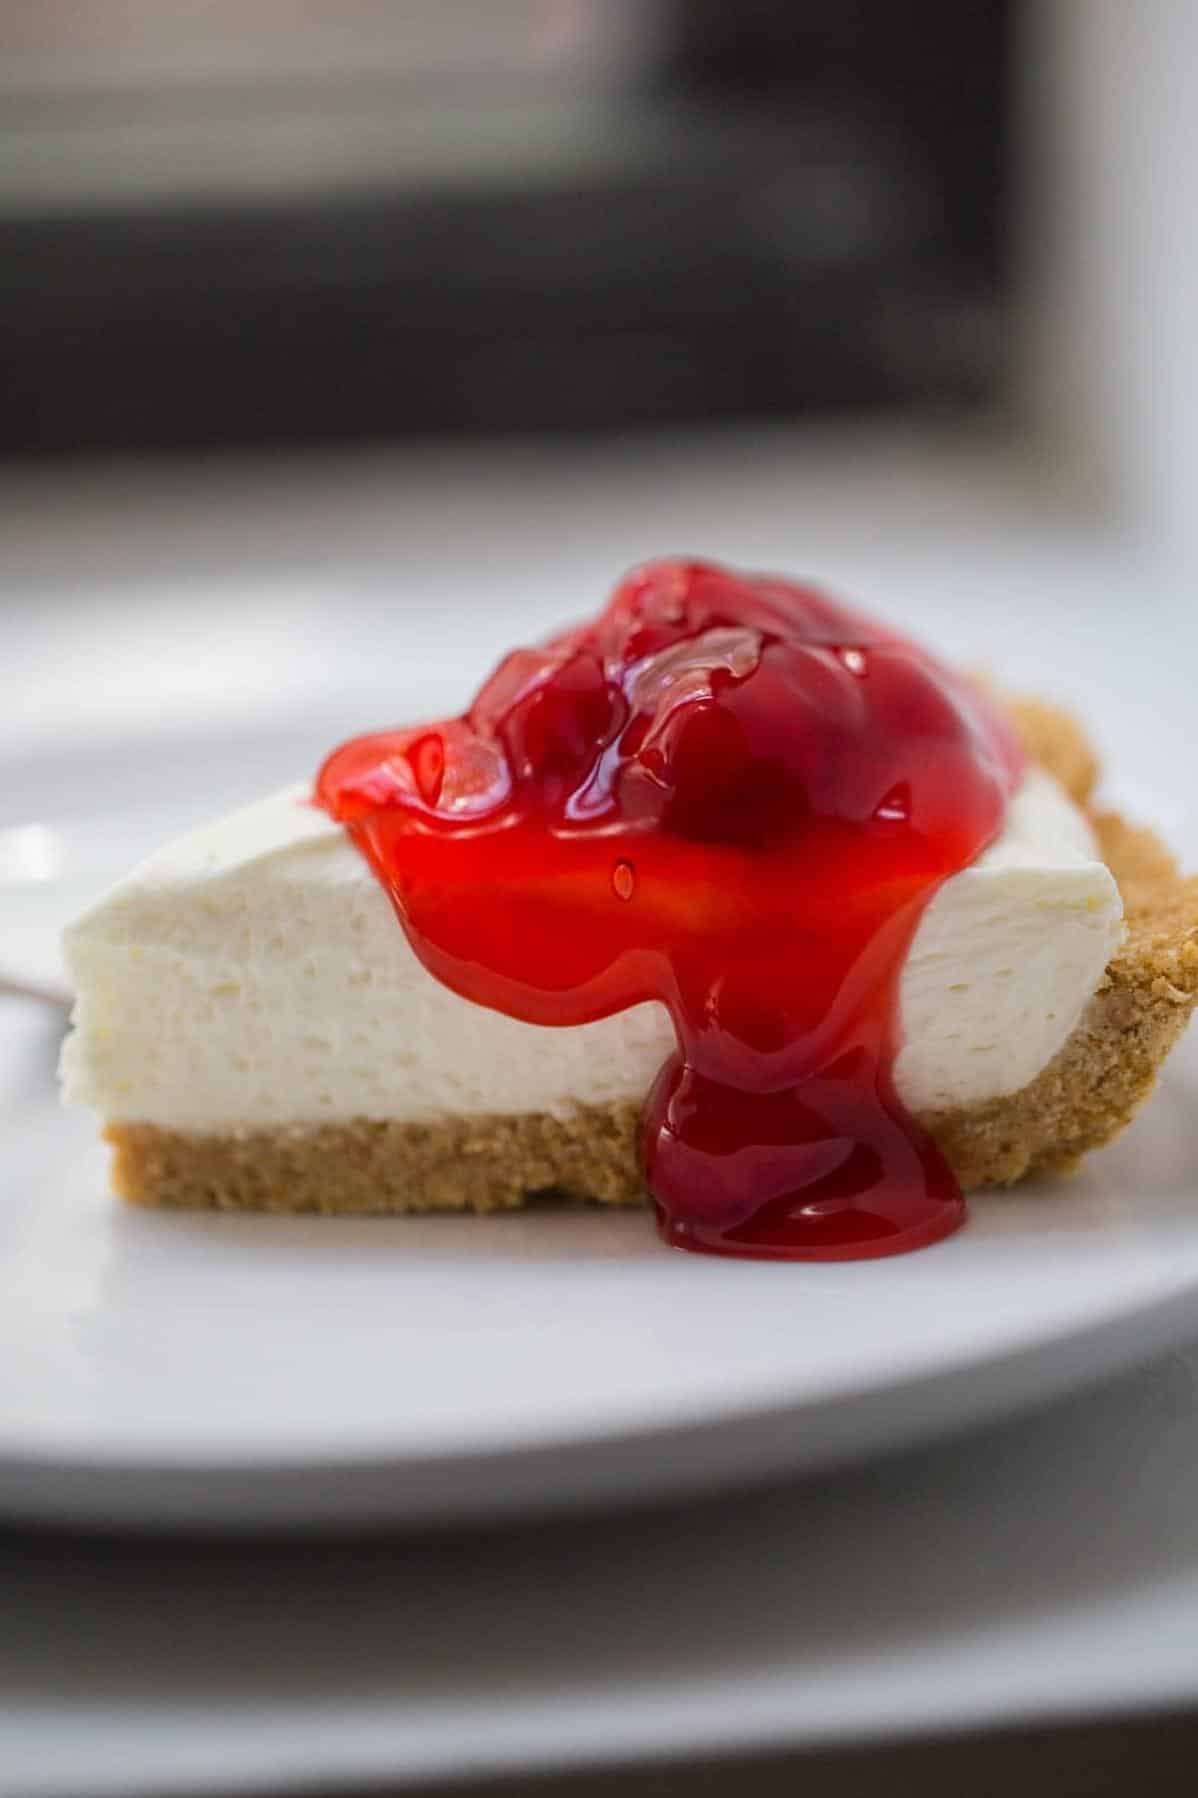  This cheesecake will steal the show